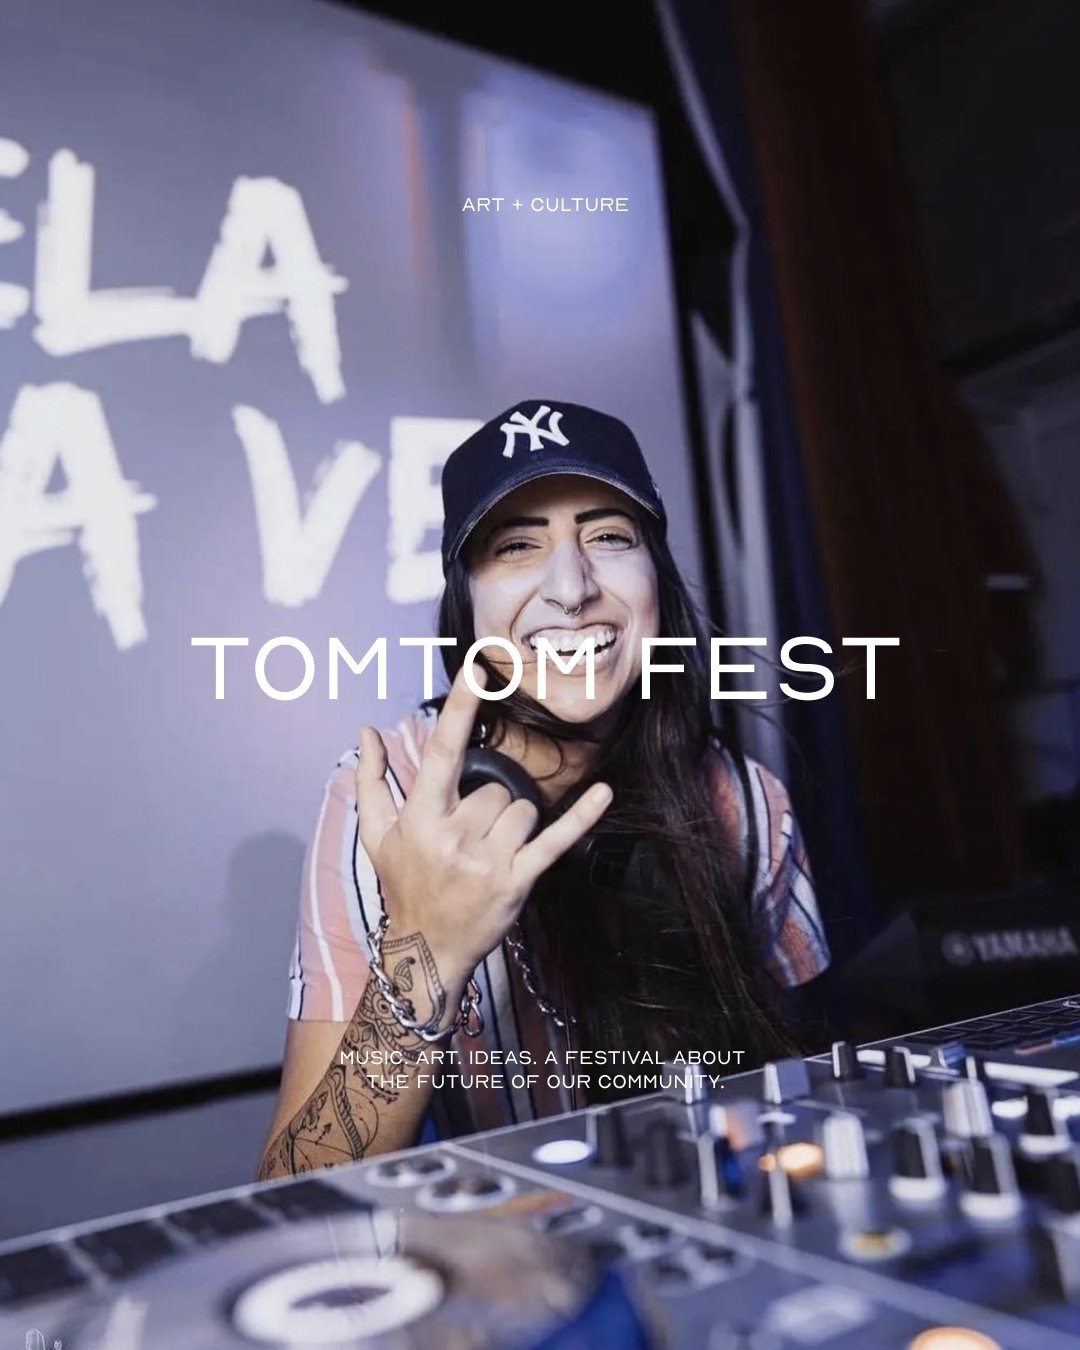 POV: You join us for the 12th Annual Tom Tom Fest 🤘🏽 hosted by @tomtomfoundation

Community is at the core of what we do. Come celebrate, dream up, and build the future of our community together.

Tom Tom Festival // April 17-21

April 16: Tom Tom 